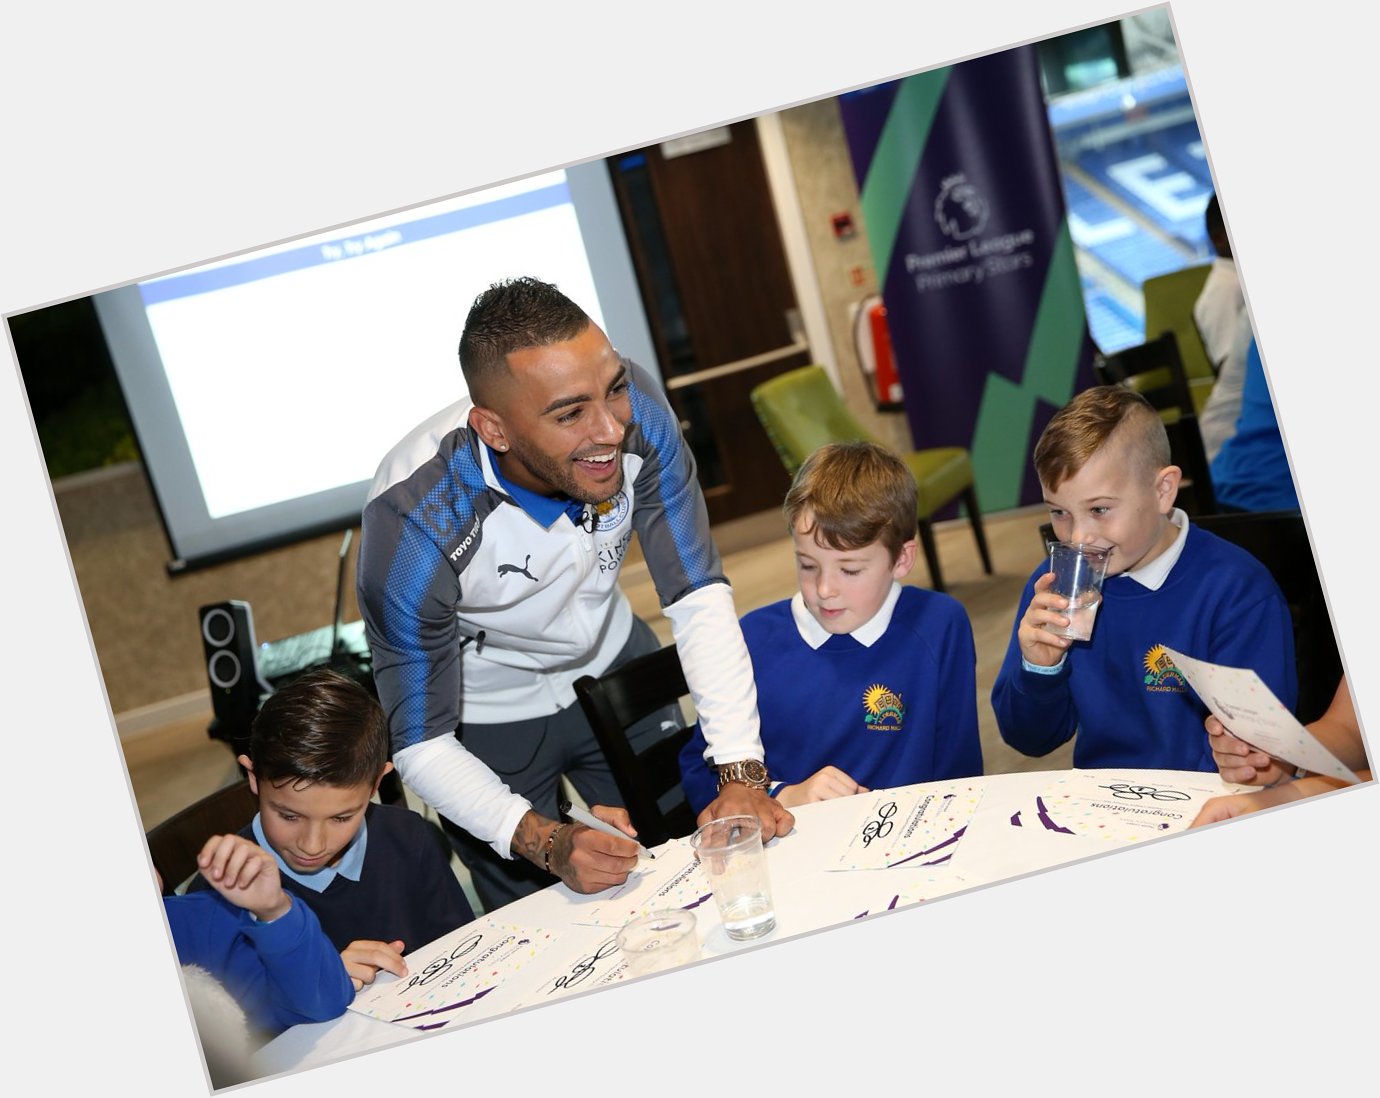 Happy Birthday to full back Danny Simpson from all at LCFC Community Trust! 